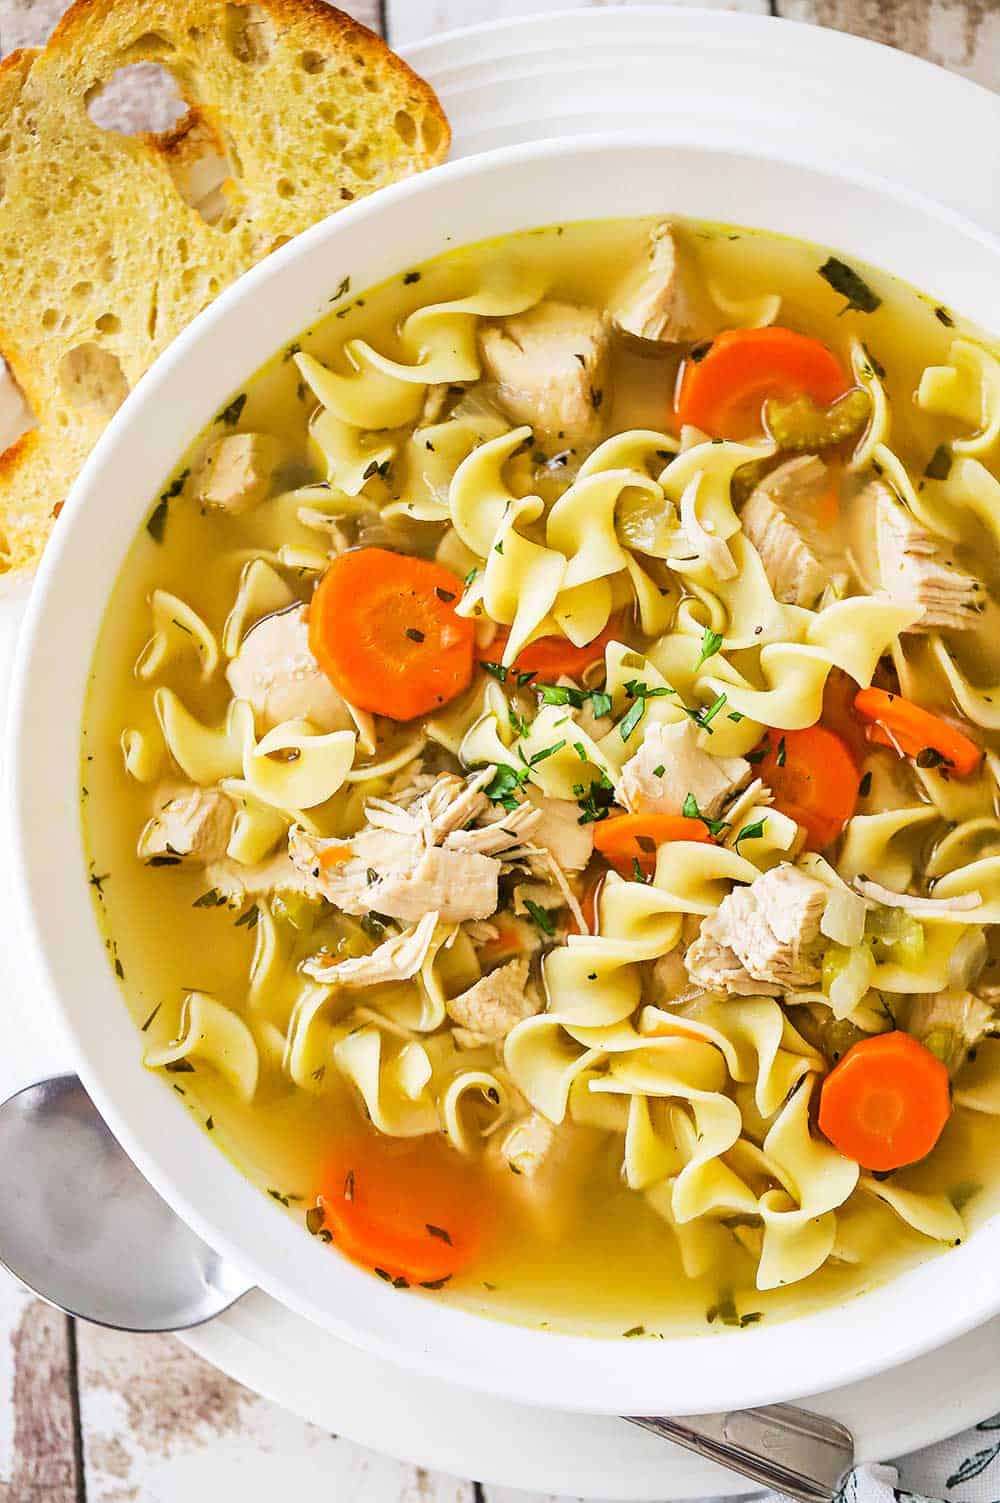 Homemade Chicken Noodle Soup (with VIDEO)